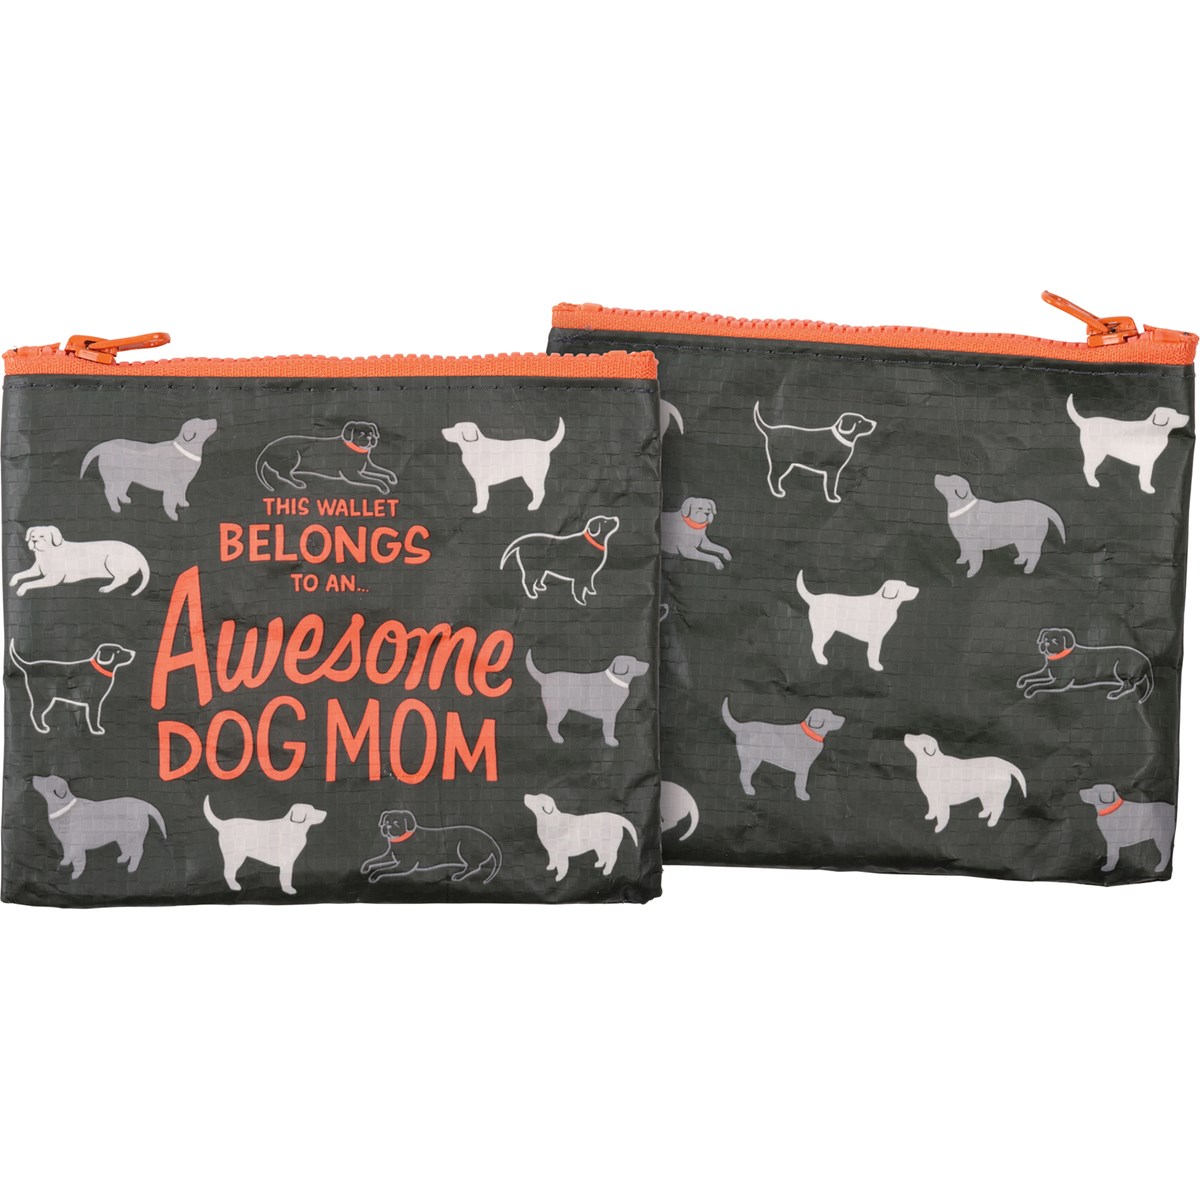 Awesome Dog Mom Zipper Wallet - Post-Consumer Material, Plastic, Metal